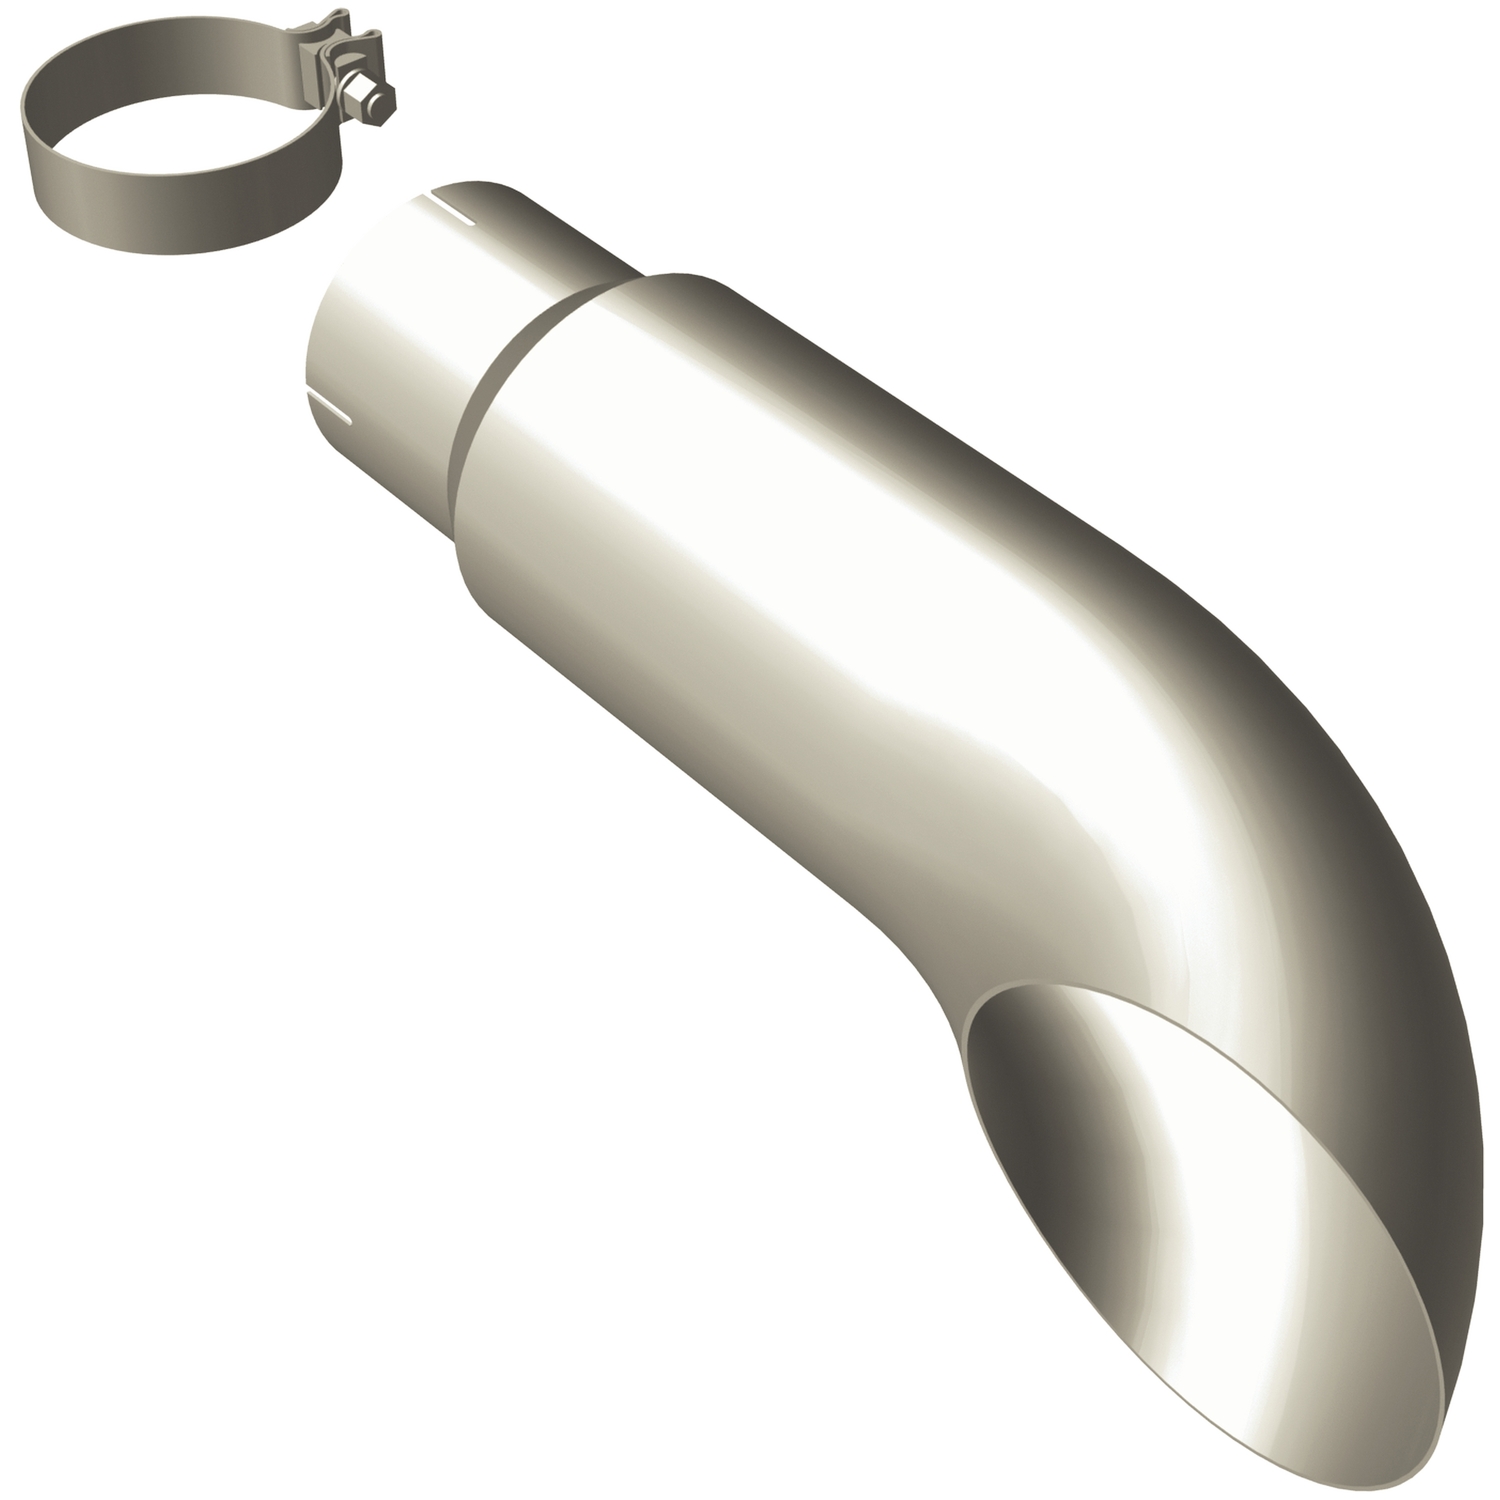 Polished Stainless Steel Clamp-On Single Exhaust Turndown Inlet Inside Diameter: 4"